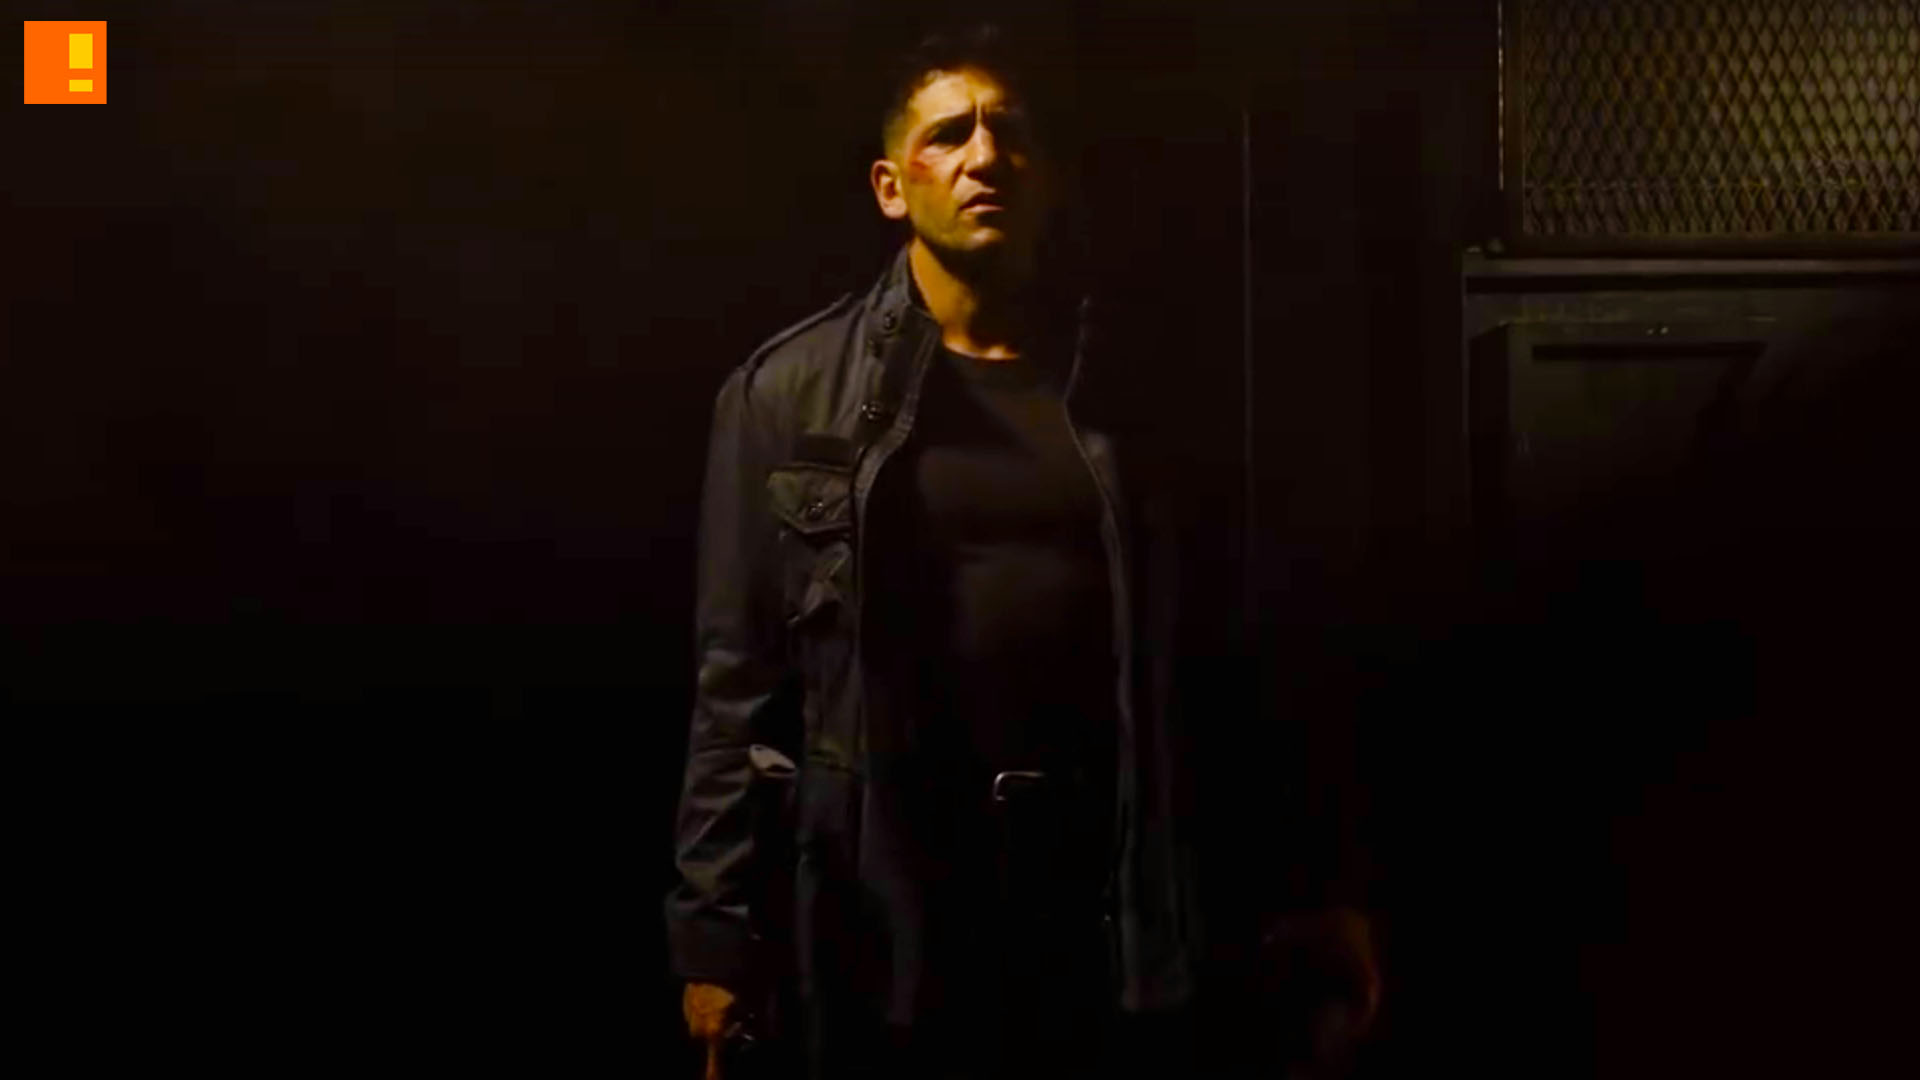 Daredevil” S2 Punisher promo – The Action Pixel